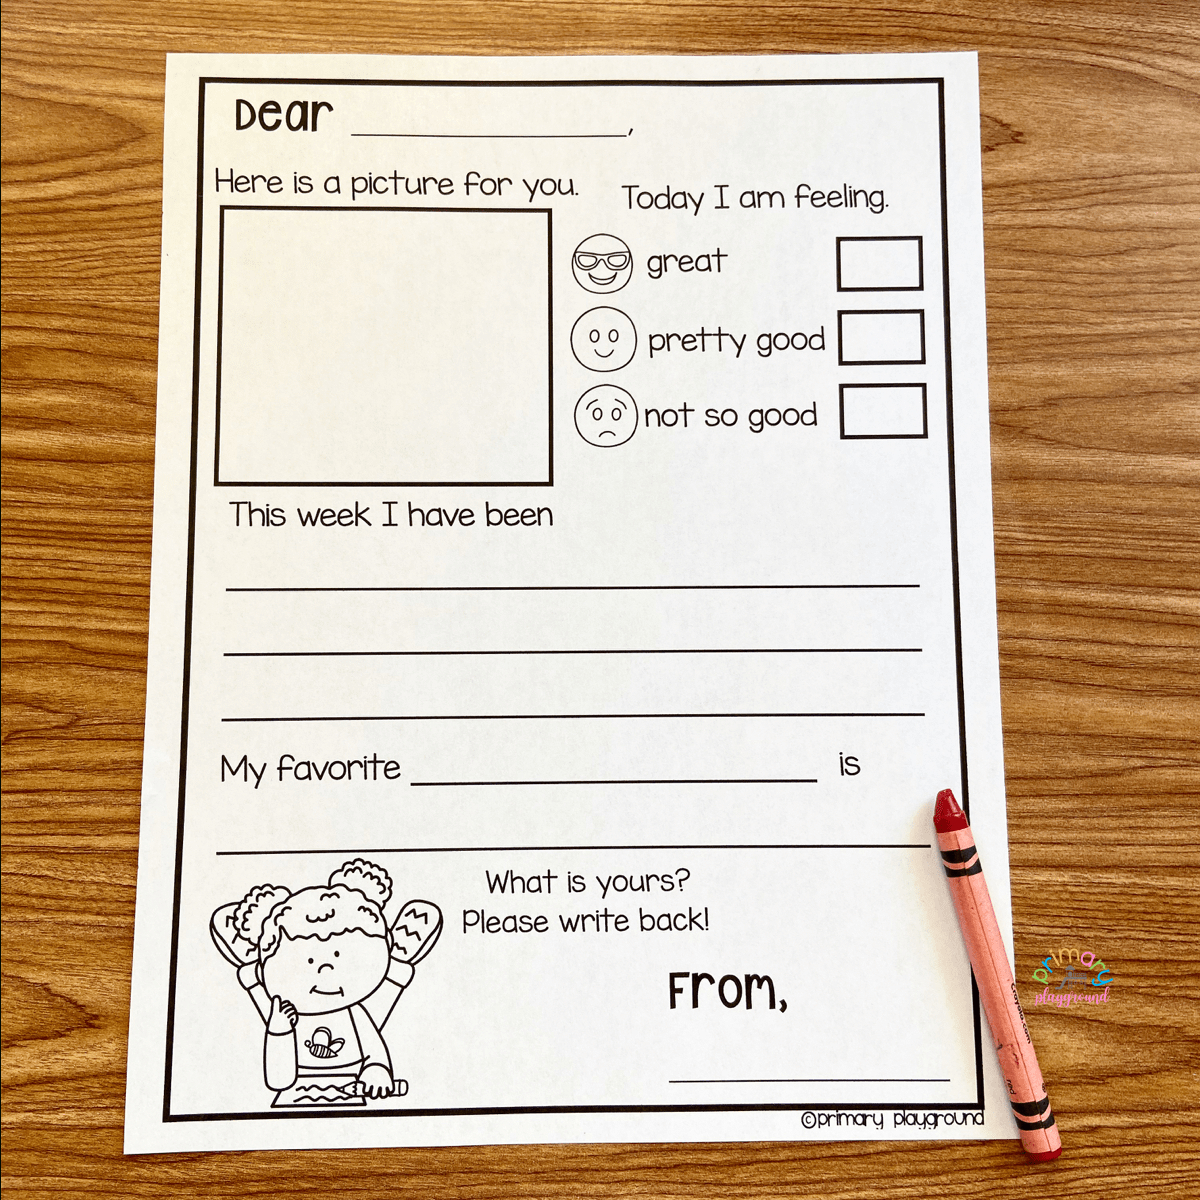 Free Printable Pen Pal Letter - Primary Playground In 2020 with regard to Letter Writing Template For Kids